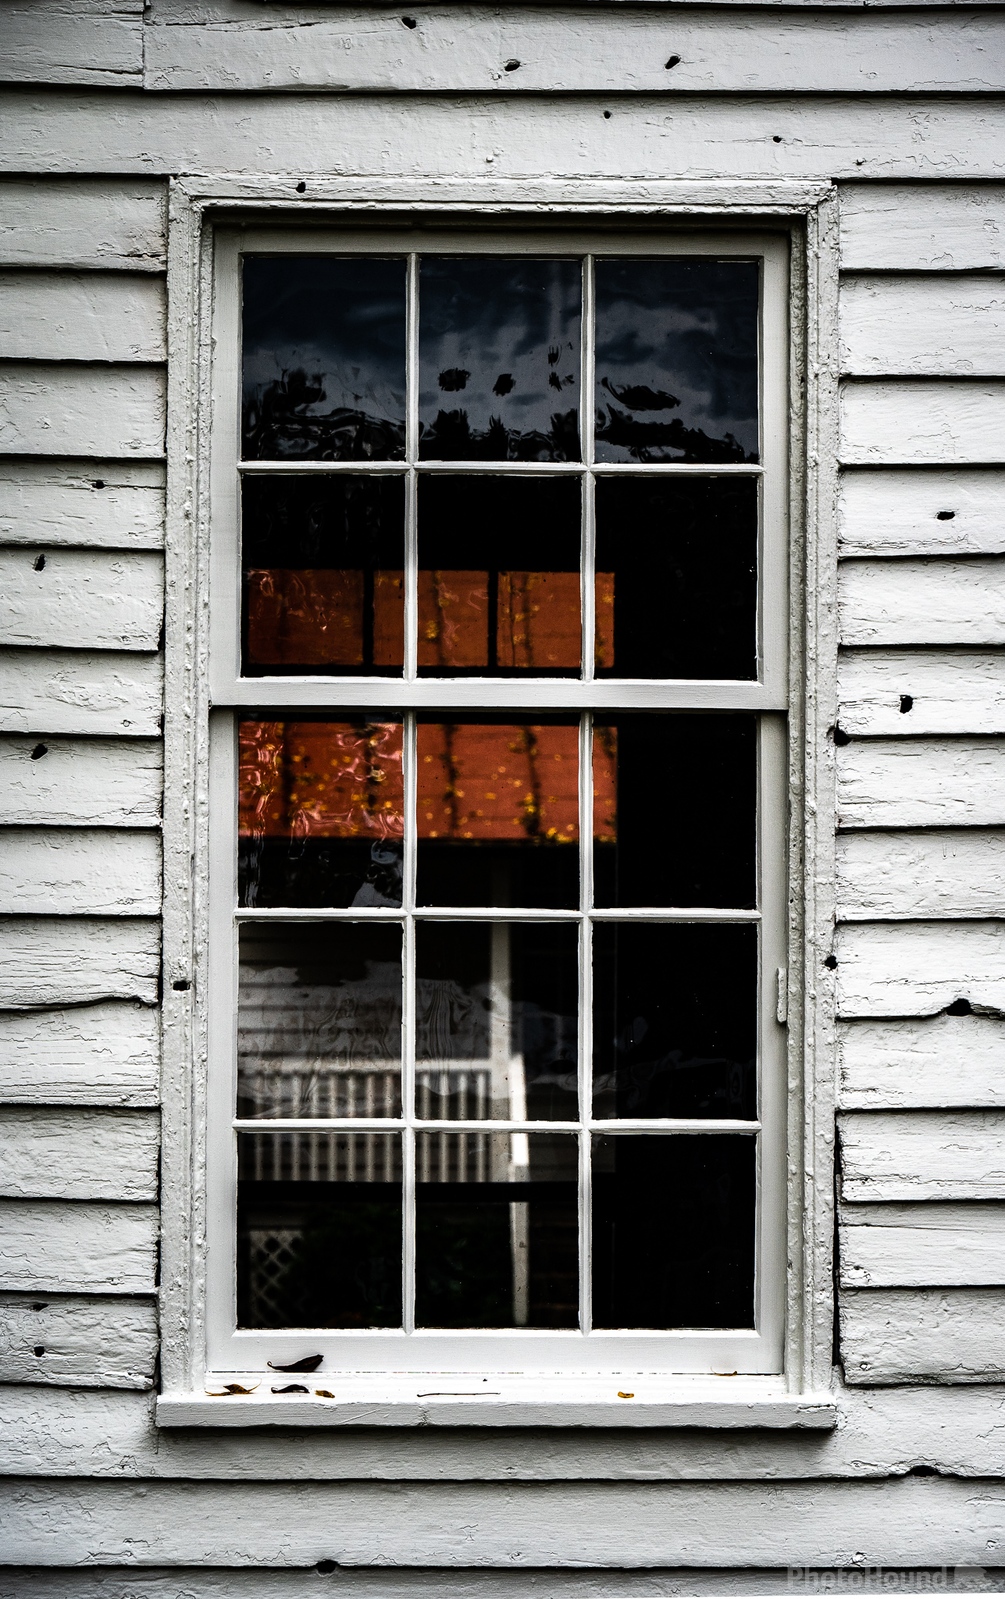 Image of Carter House / Franklin Battlefield by Charley Corace